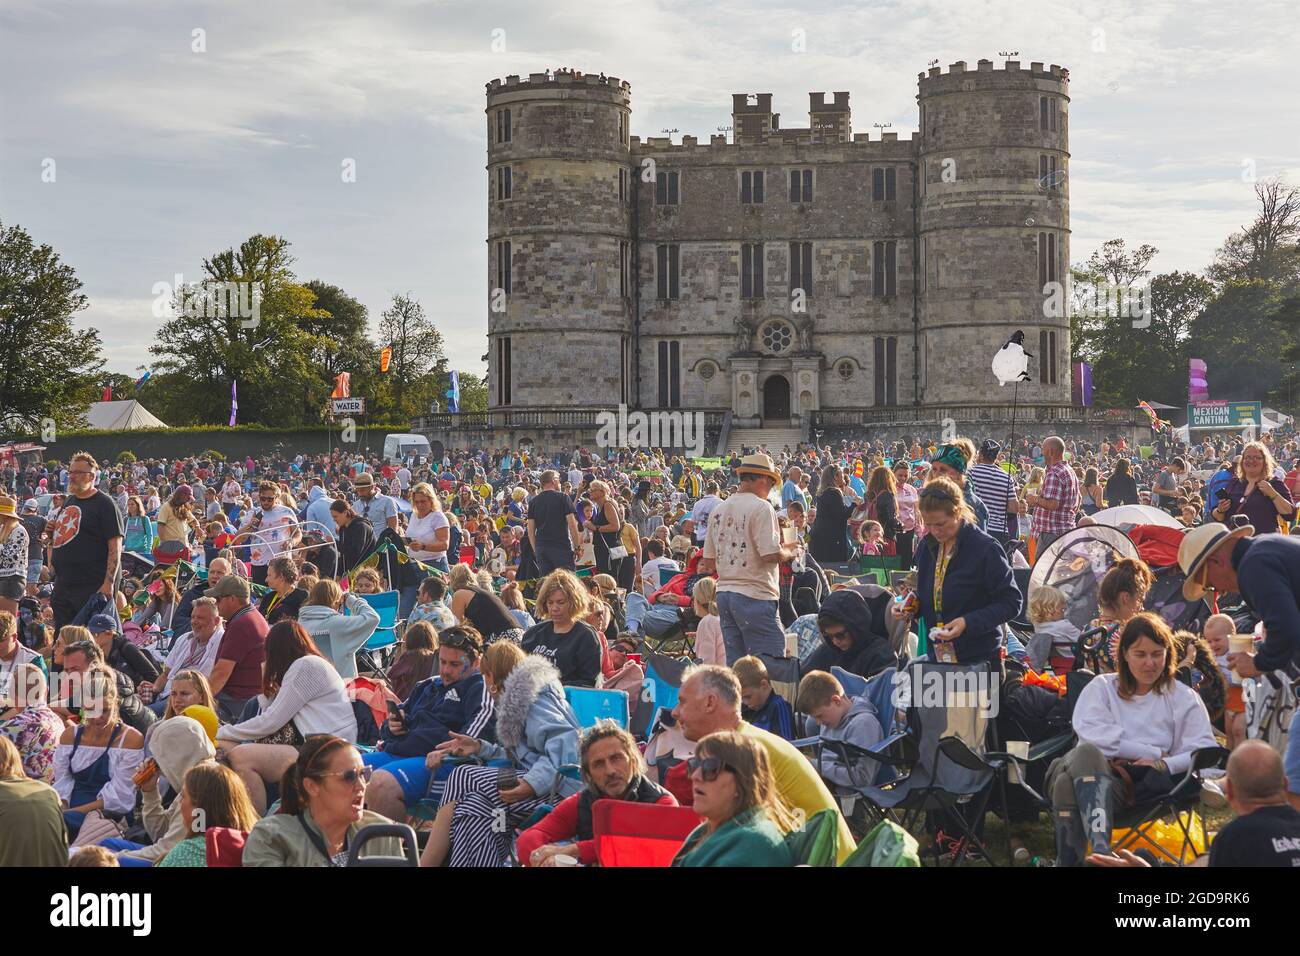 Crowds at a rock music festival, in front of Lulworth Castle. Camp Bestival, Lulworth, Dorset, Great Britain. Stock Photo